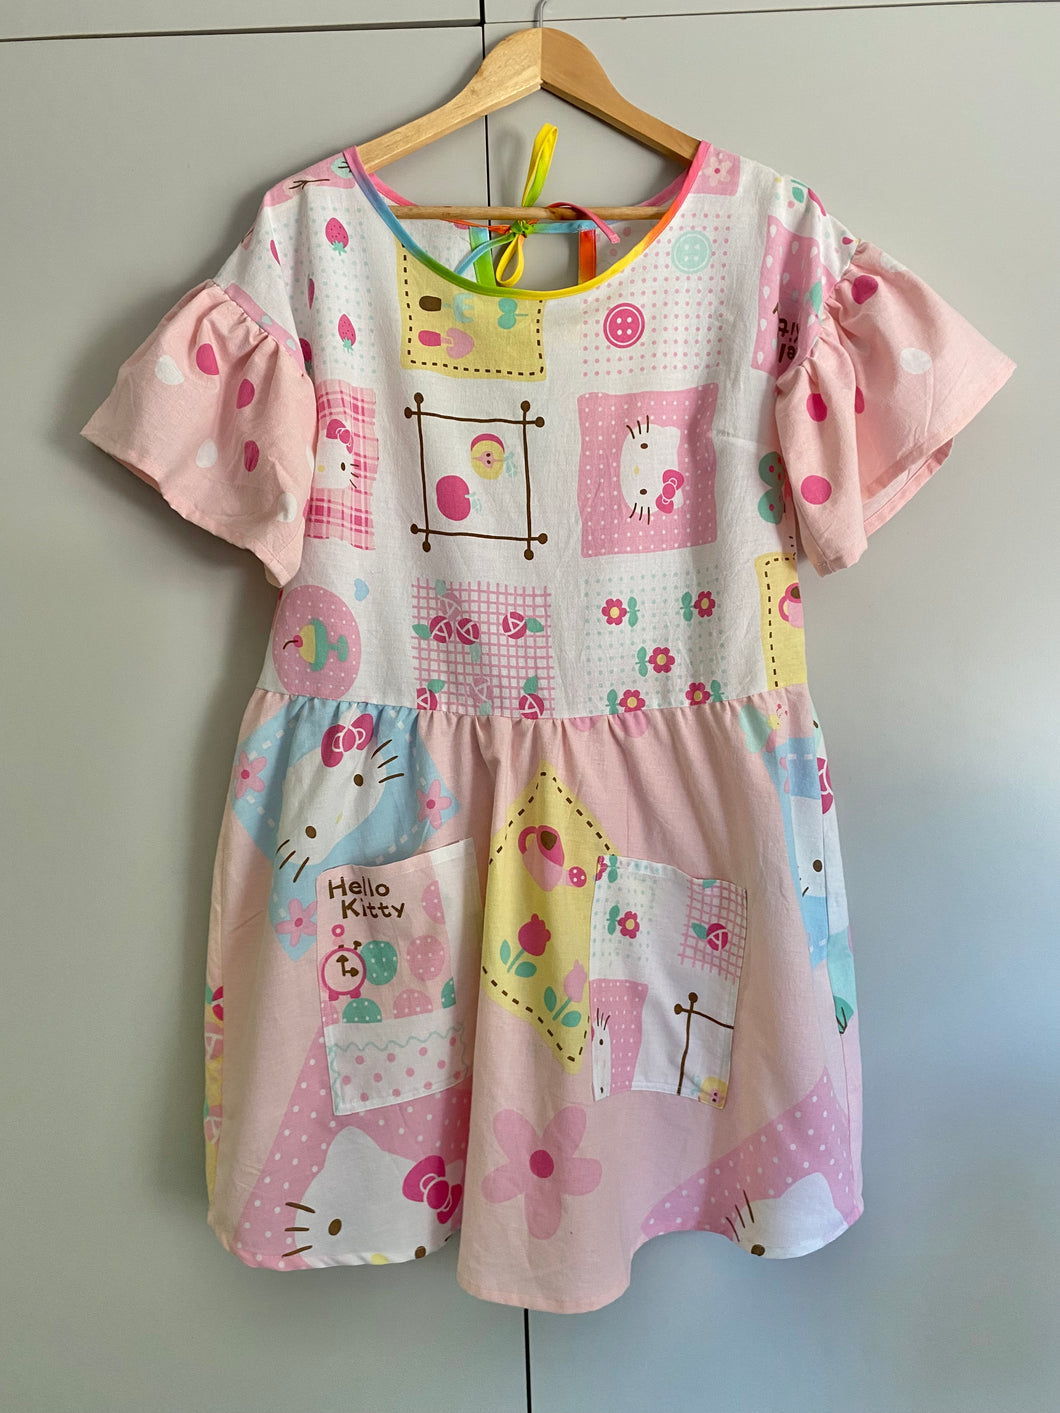 Hello Kitty Kadence Patchwork Dress - S and L Size